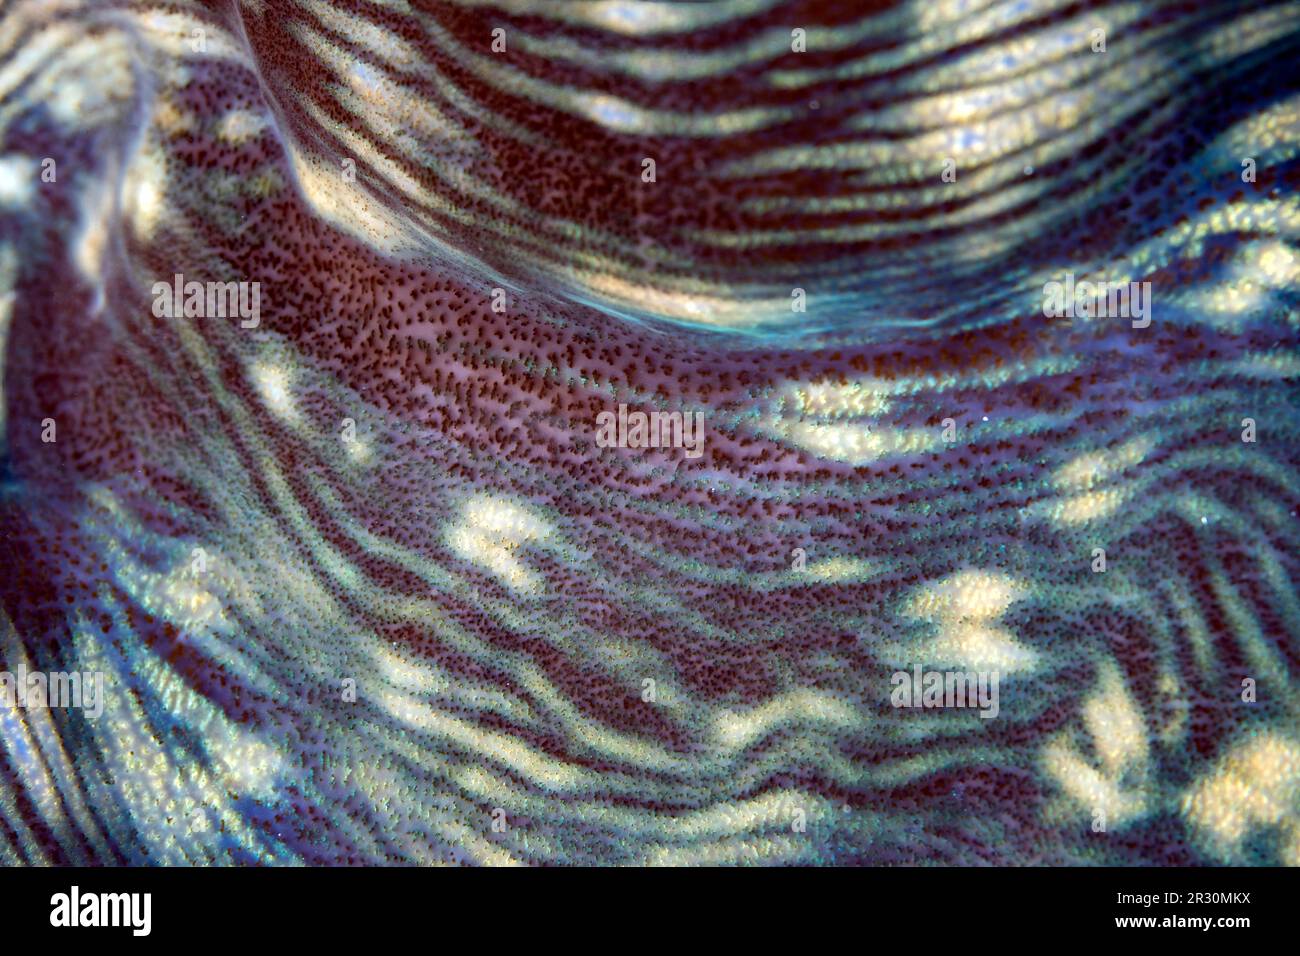 Closeup of an Abstract Pattern of a Giant Clam Shell Stock Photo